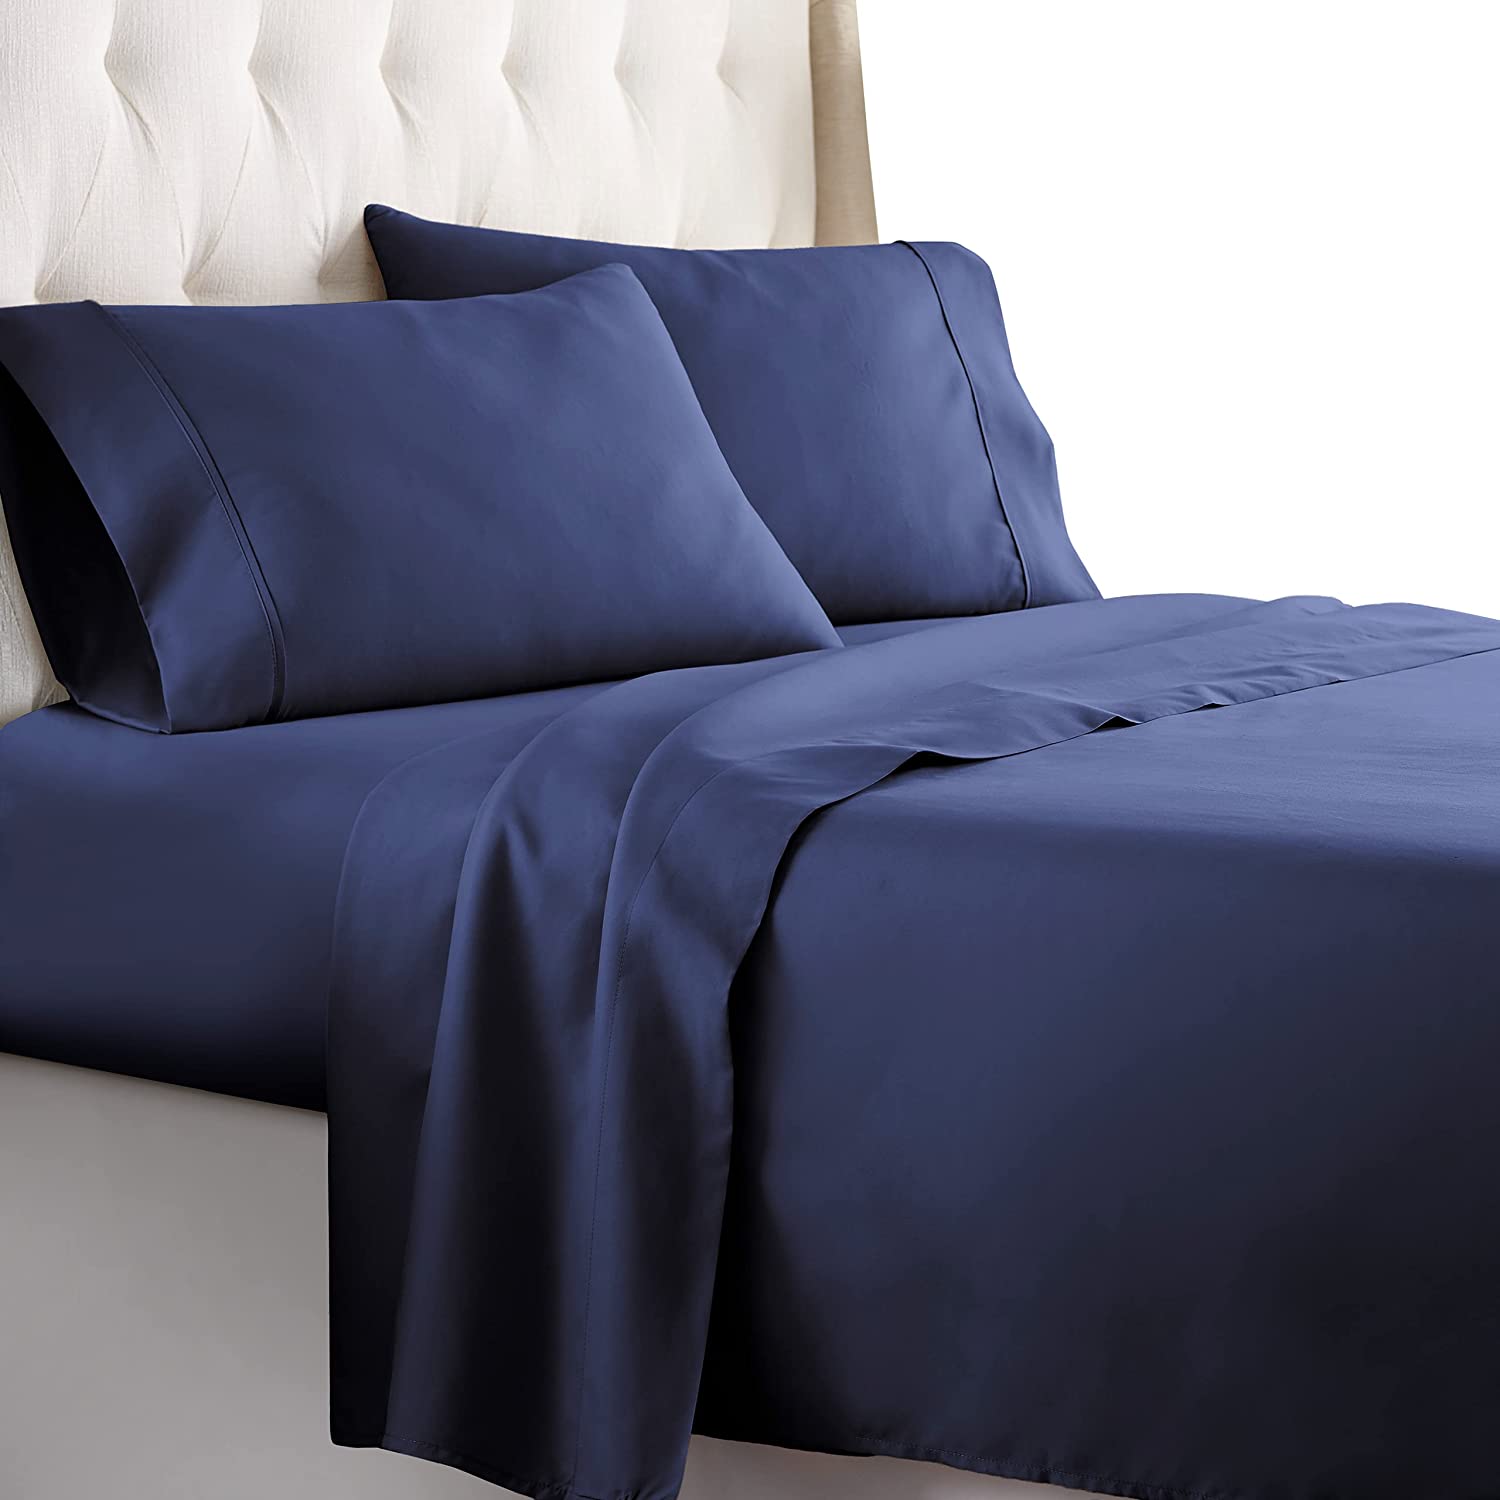 14 Inch Pocket Fitted Sheet Solid Navy Blue Egyptian Cotton at-EgyptianHomeLinens.com